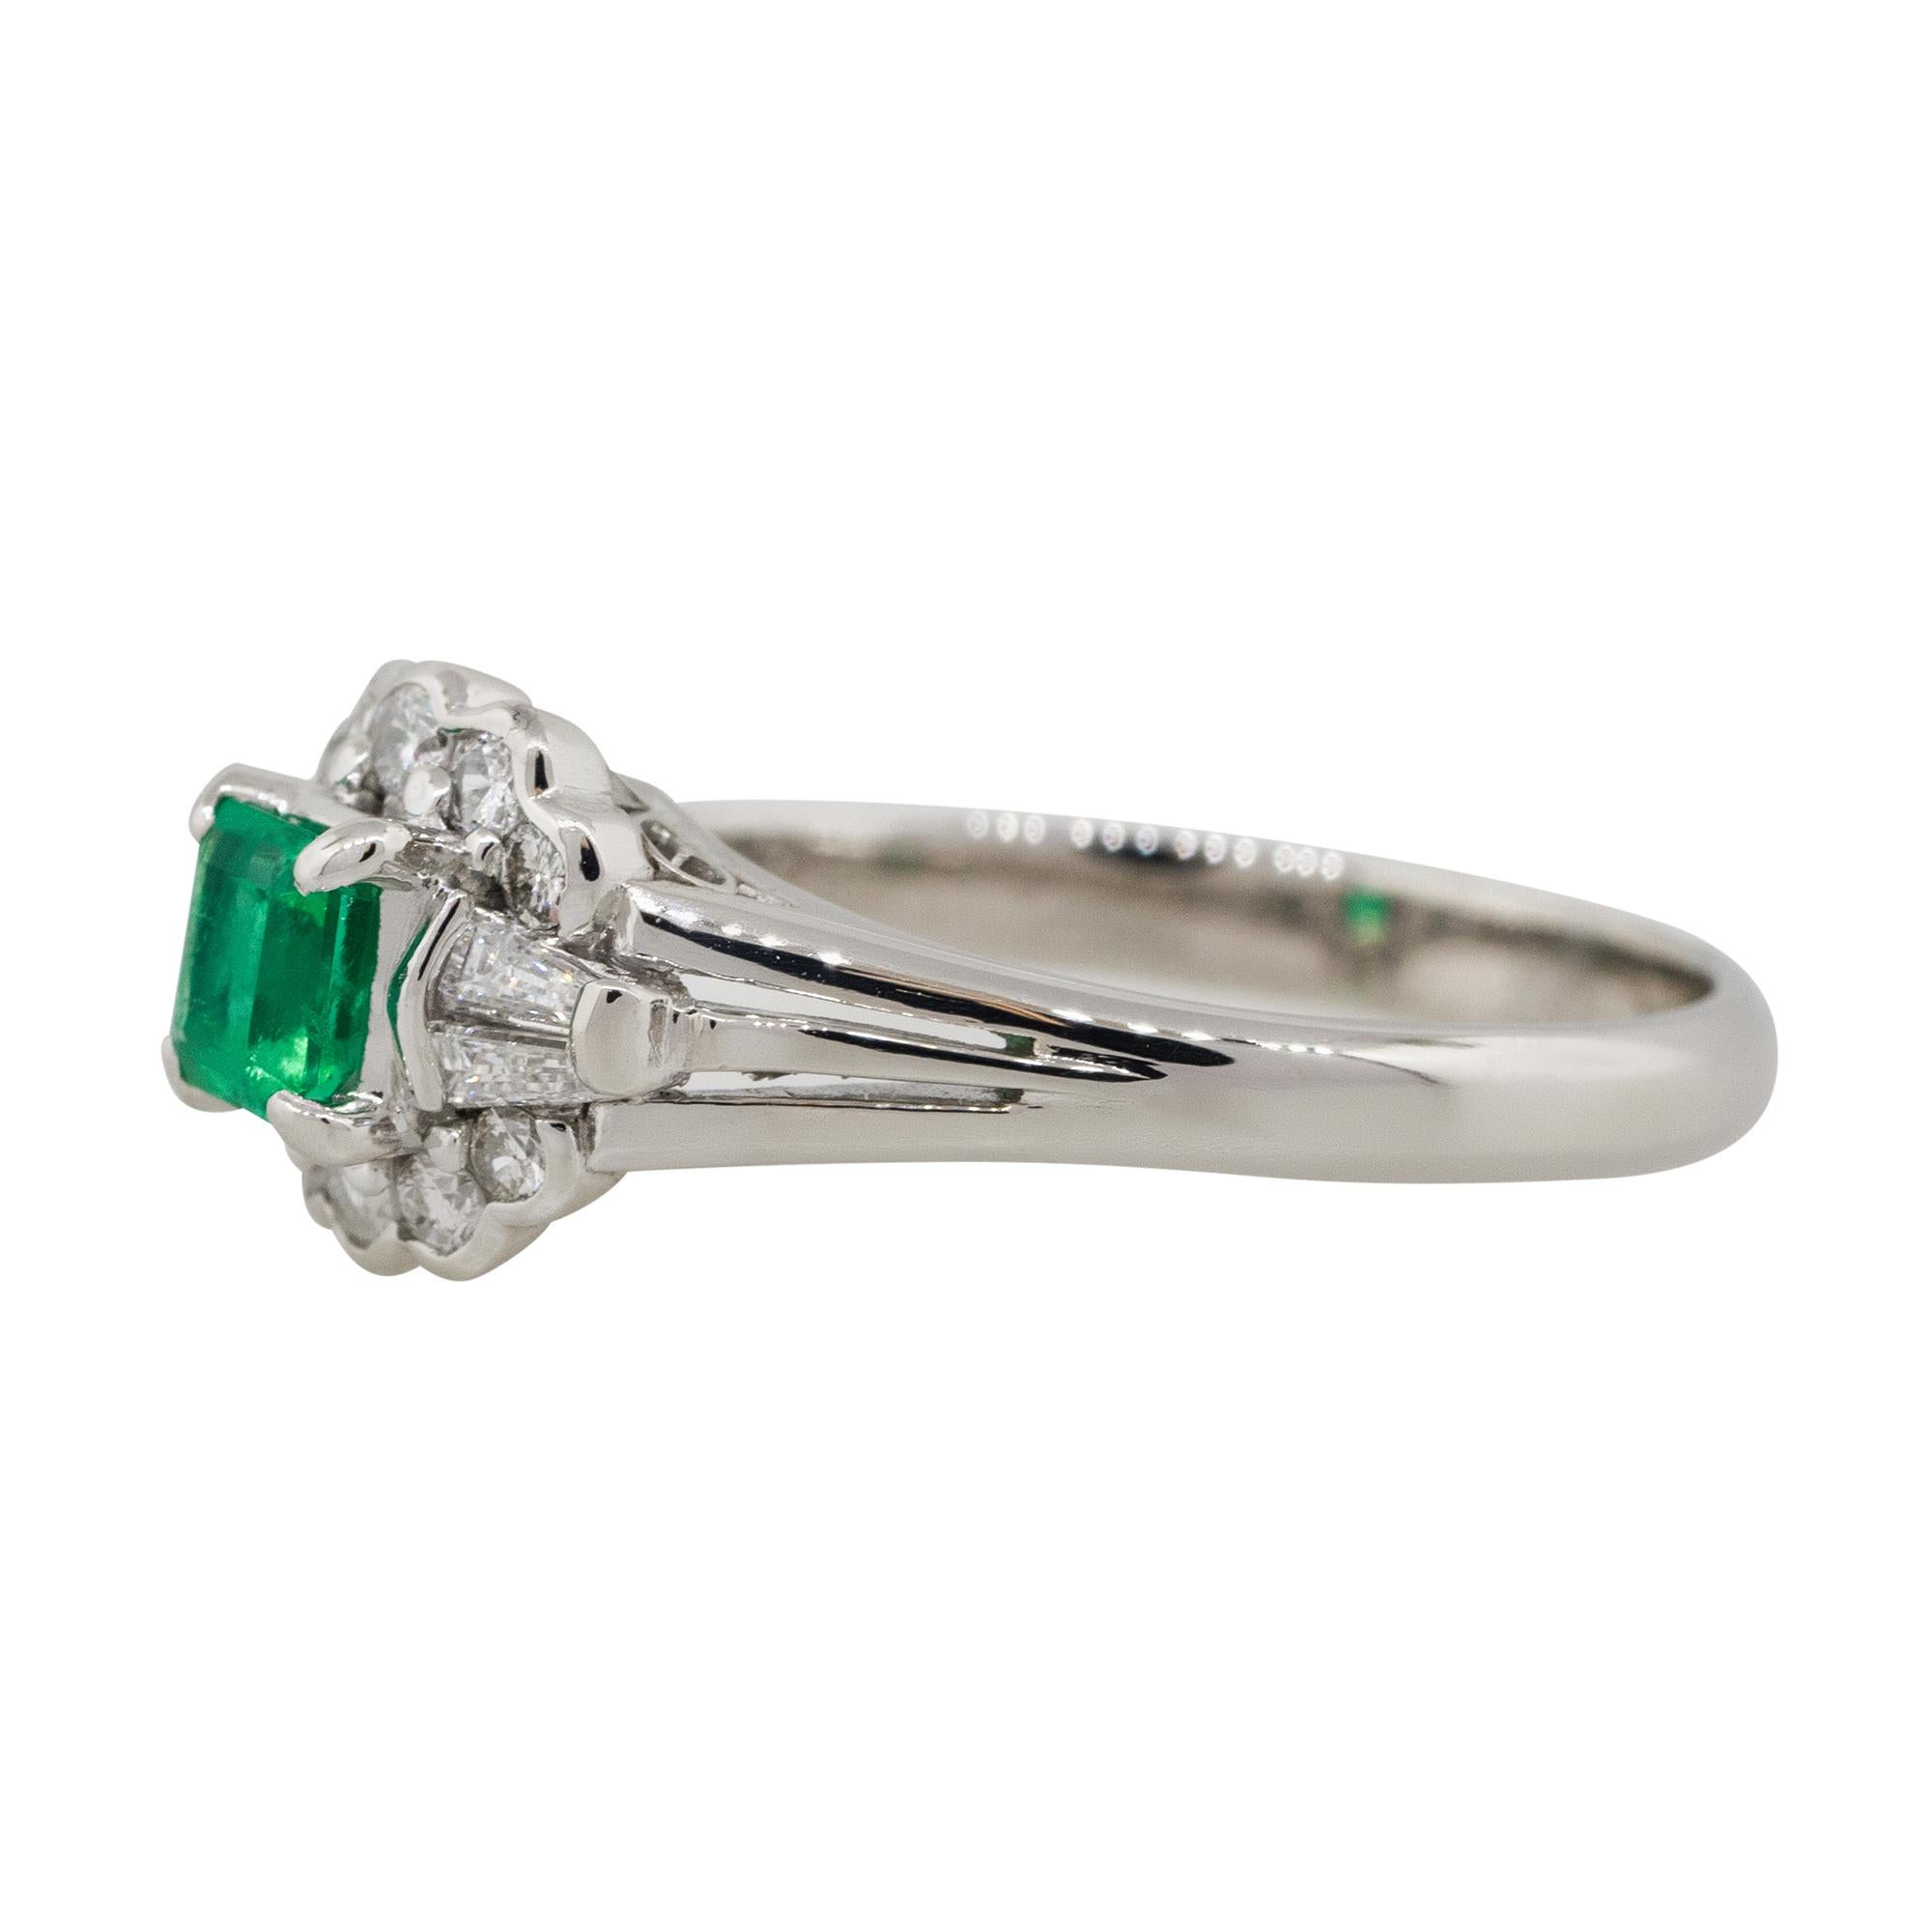 Material: Platinum
Center Gemstone Details: Approx. 0.37ctw Emerald center gemstone
Diamond Details: Approx. 0.30ctw of round cut and baguette shaped Diamonds. Diamonds are G/H in color and VS in clarity
Size: 6.25
Total weight: 4.9g